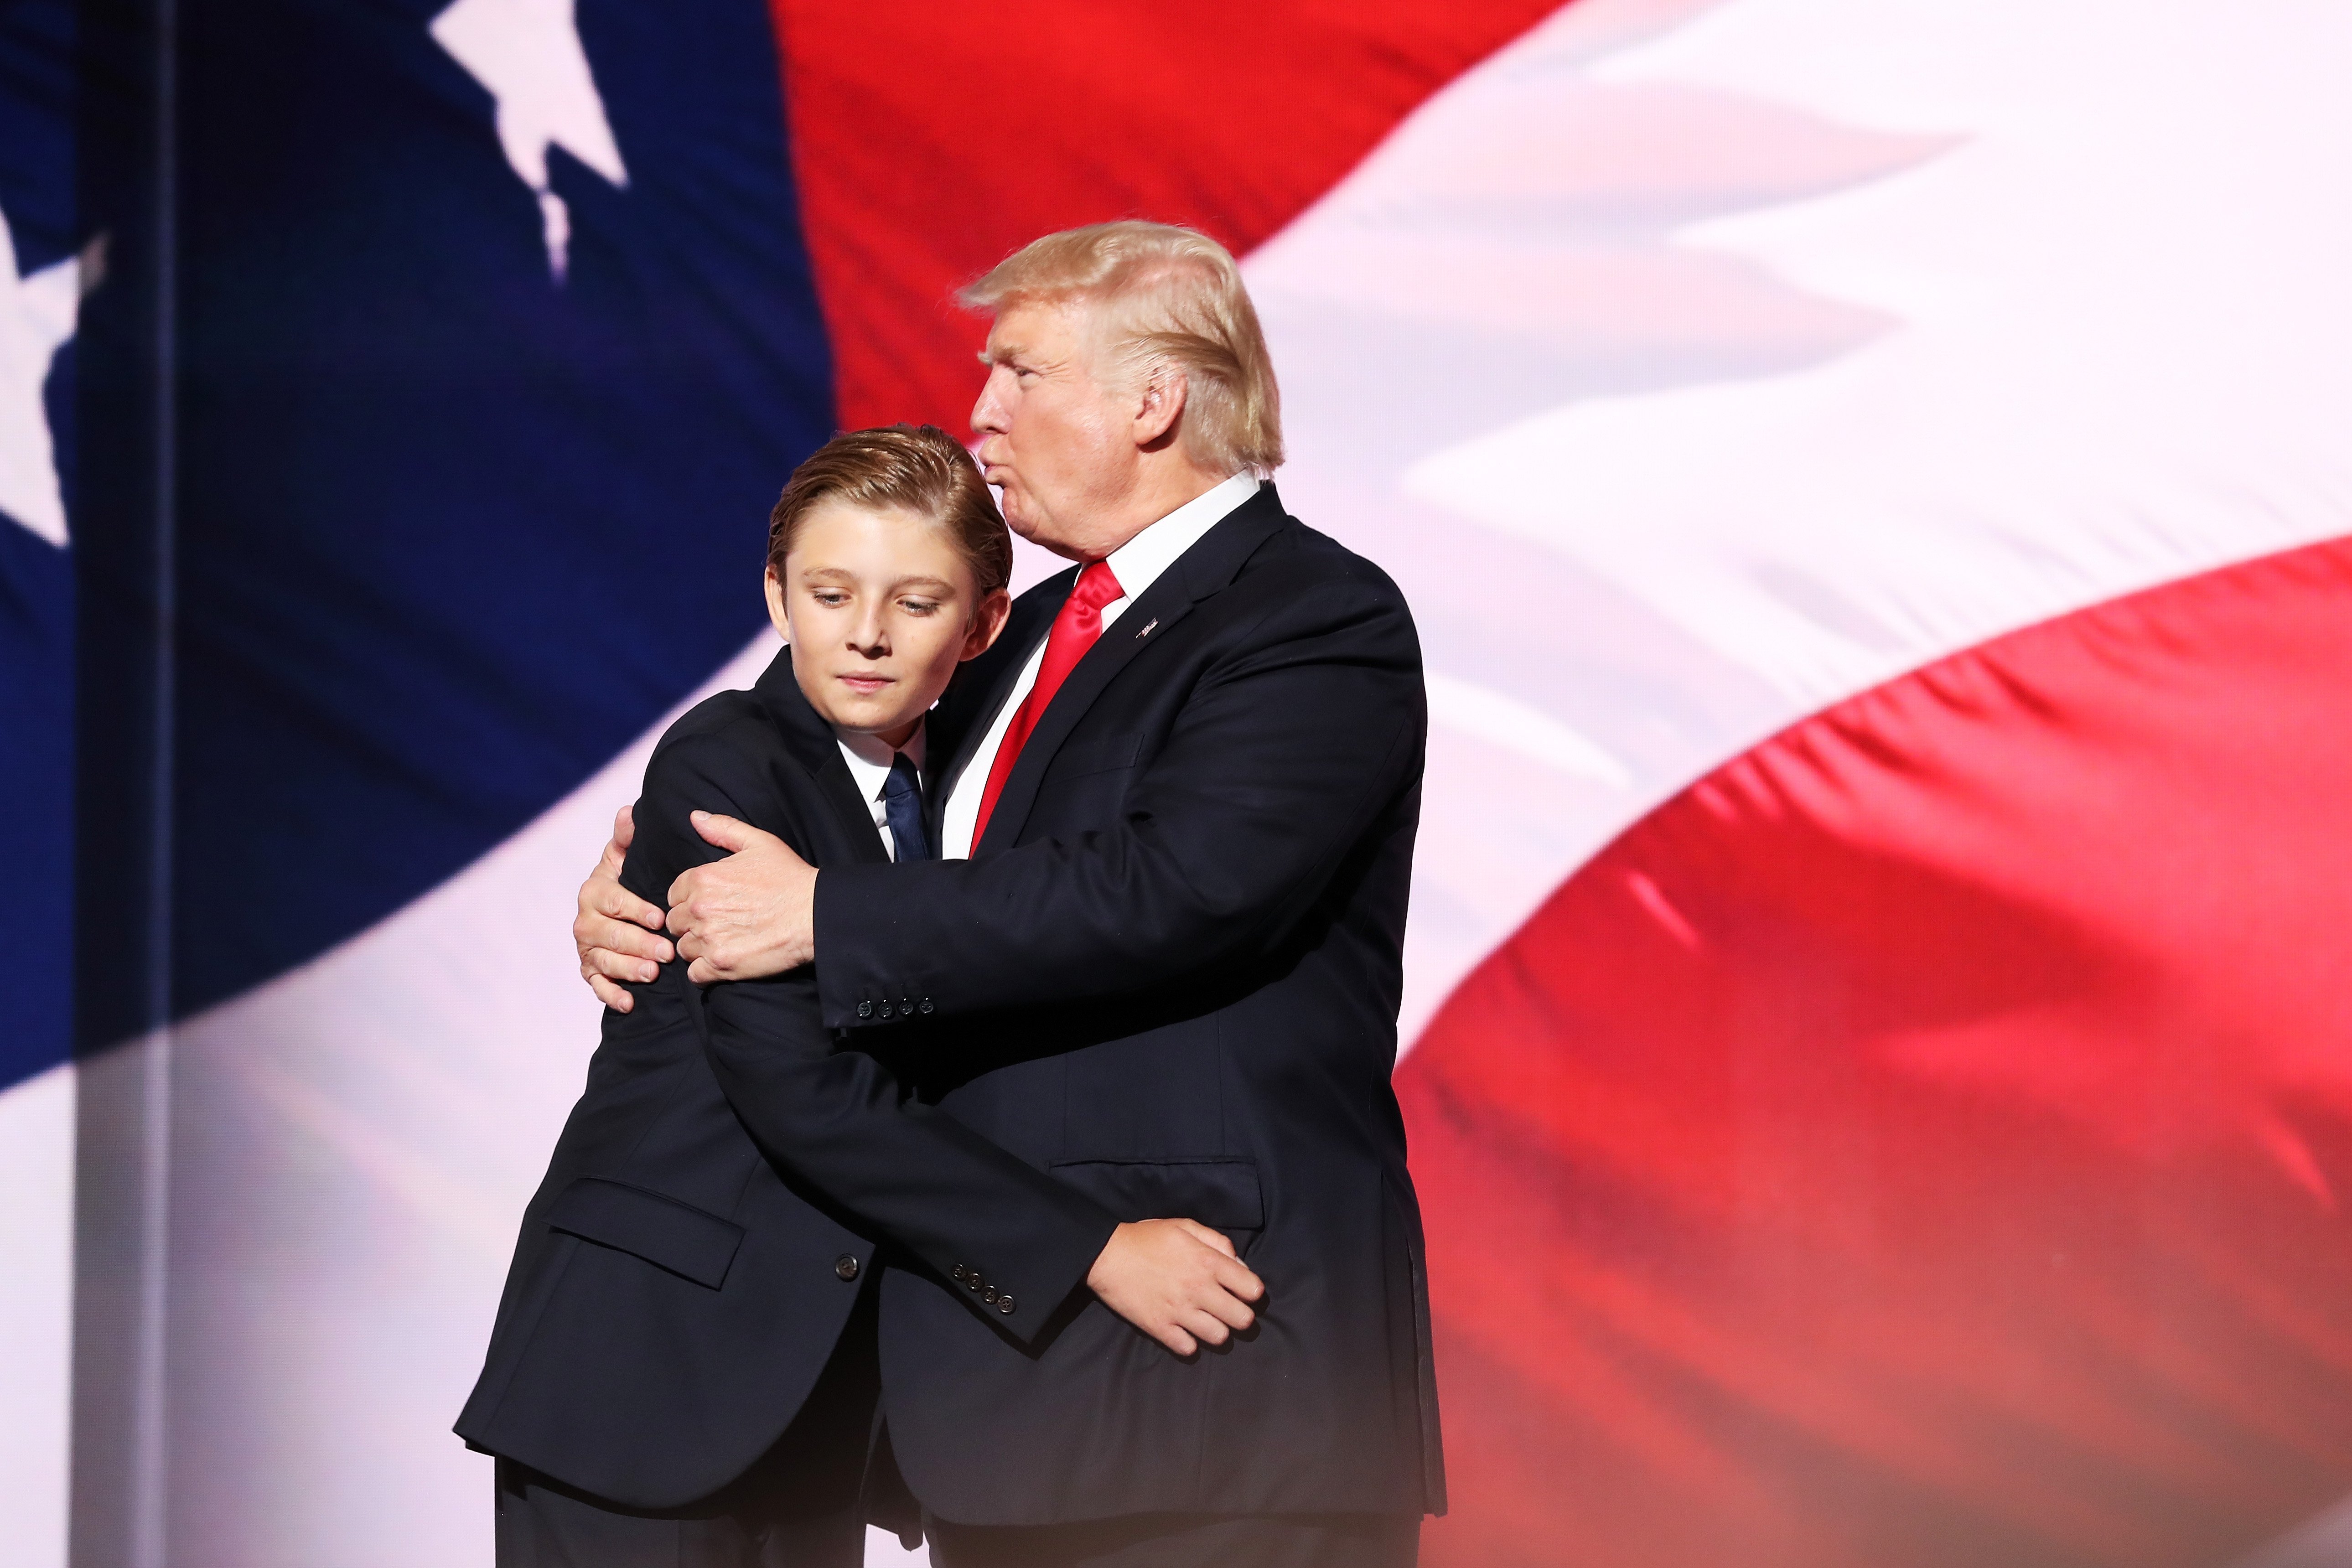 Donald embraces his son Barron Trump after he delivered his speech on the fourth day of the Republican National Convention on July 21, 2016 in Cleveland, Ohio | Photo: Getty Images